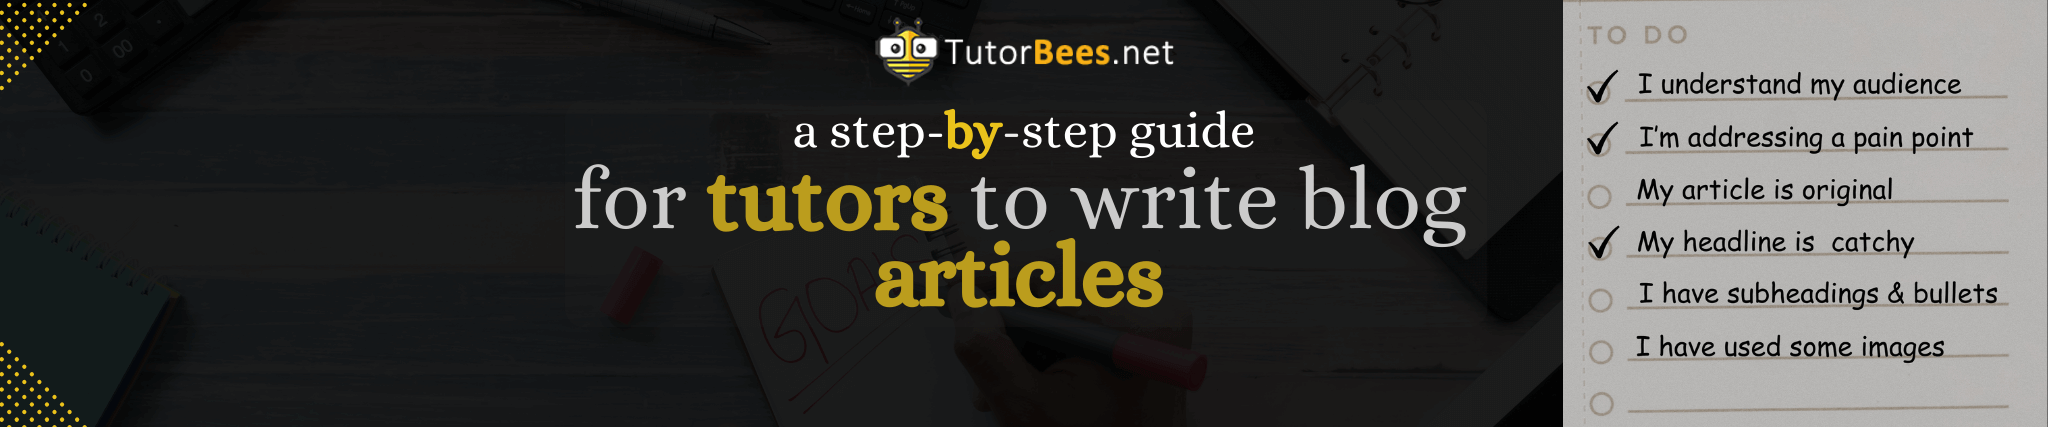 A Step-by-Step Guide for tutors to write blog articles